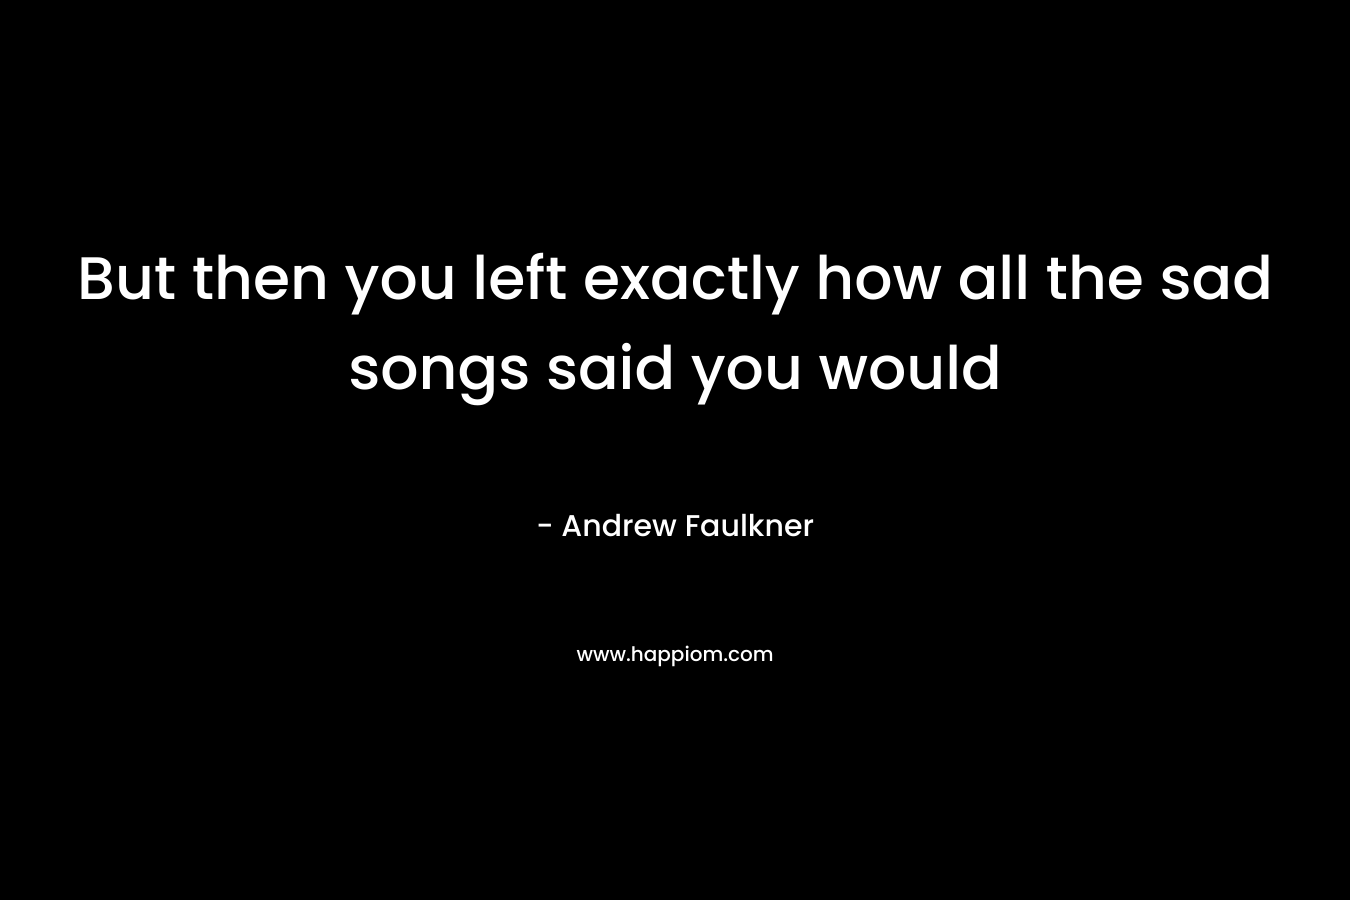 But then you left exactly how all the sad songs said you would – Andrew Faulkner